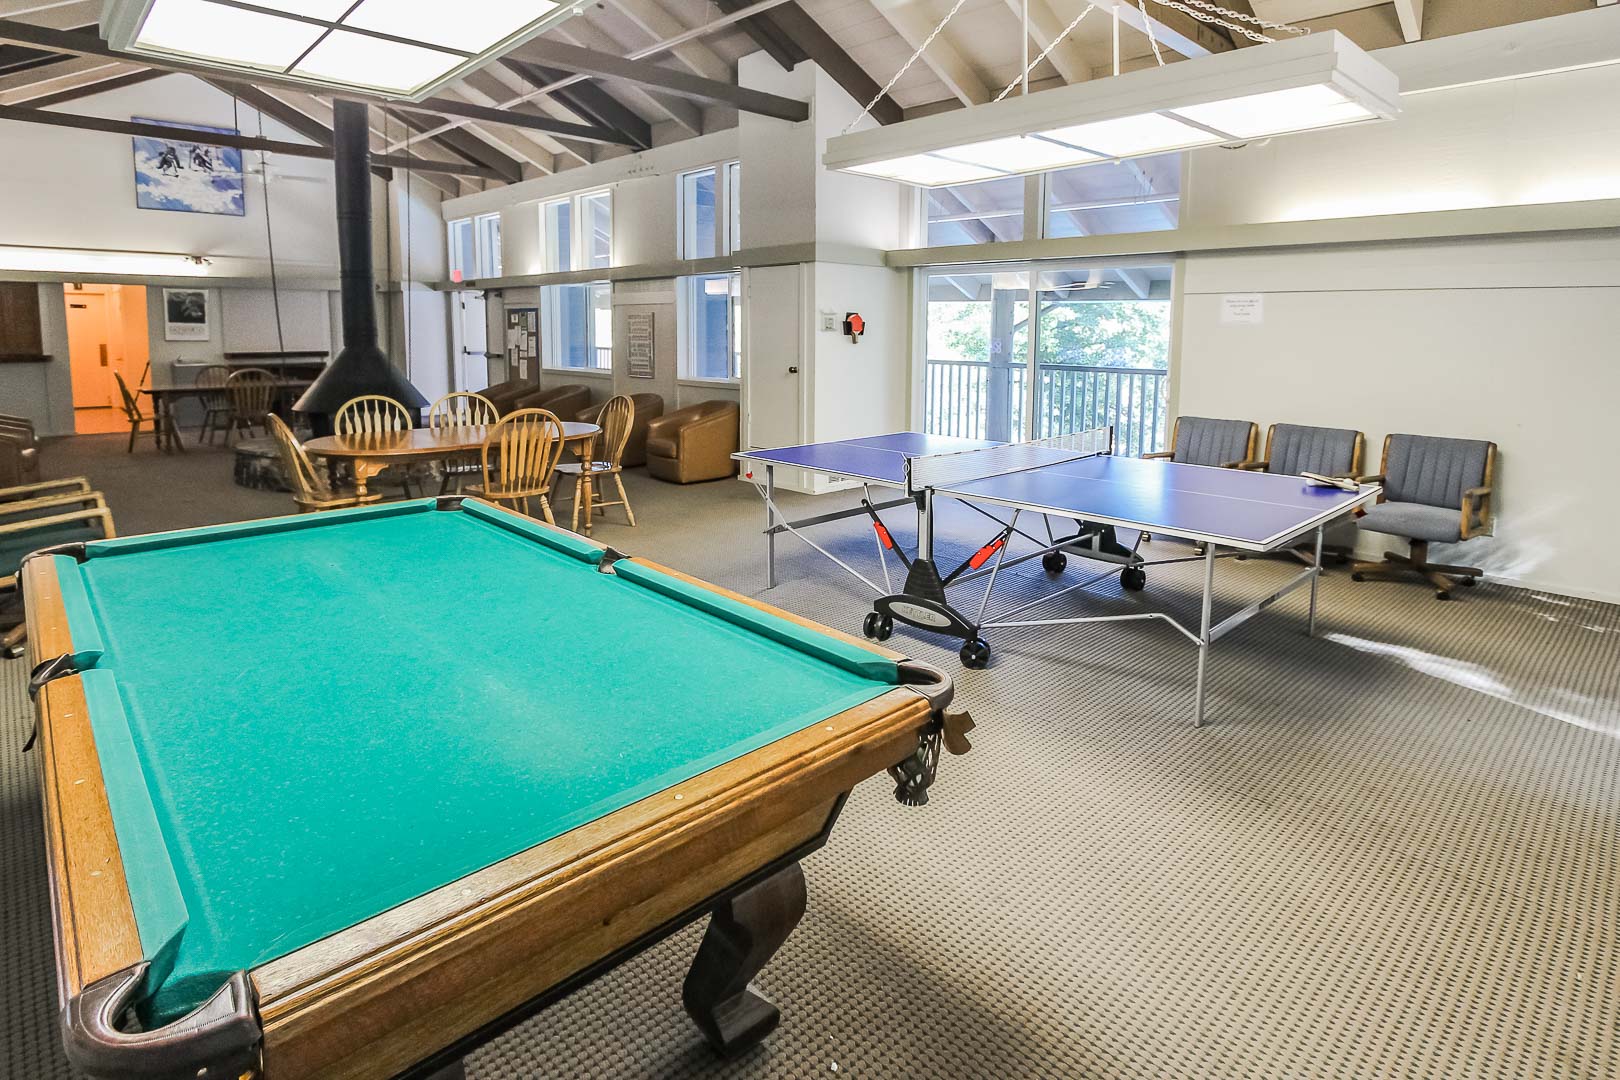 Game room for families to enjoy at VRI's Lake Arrowhead Chalets in California.